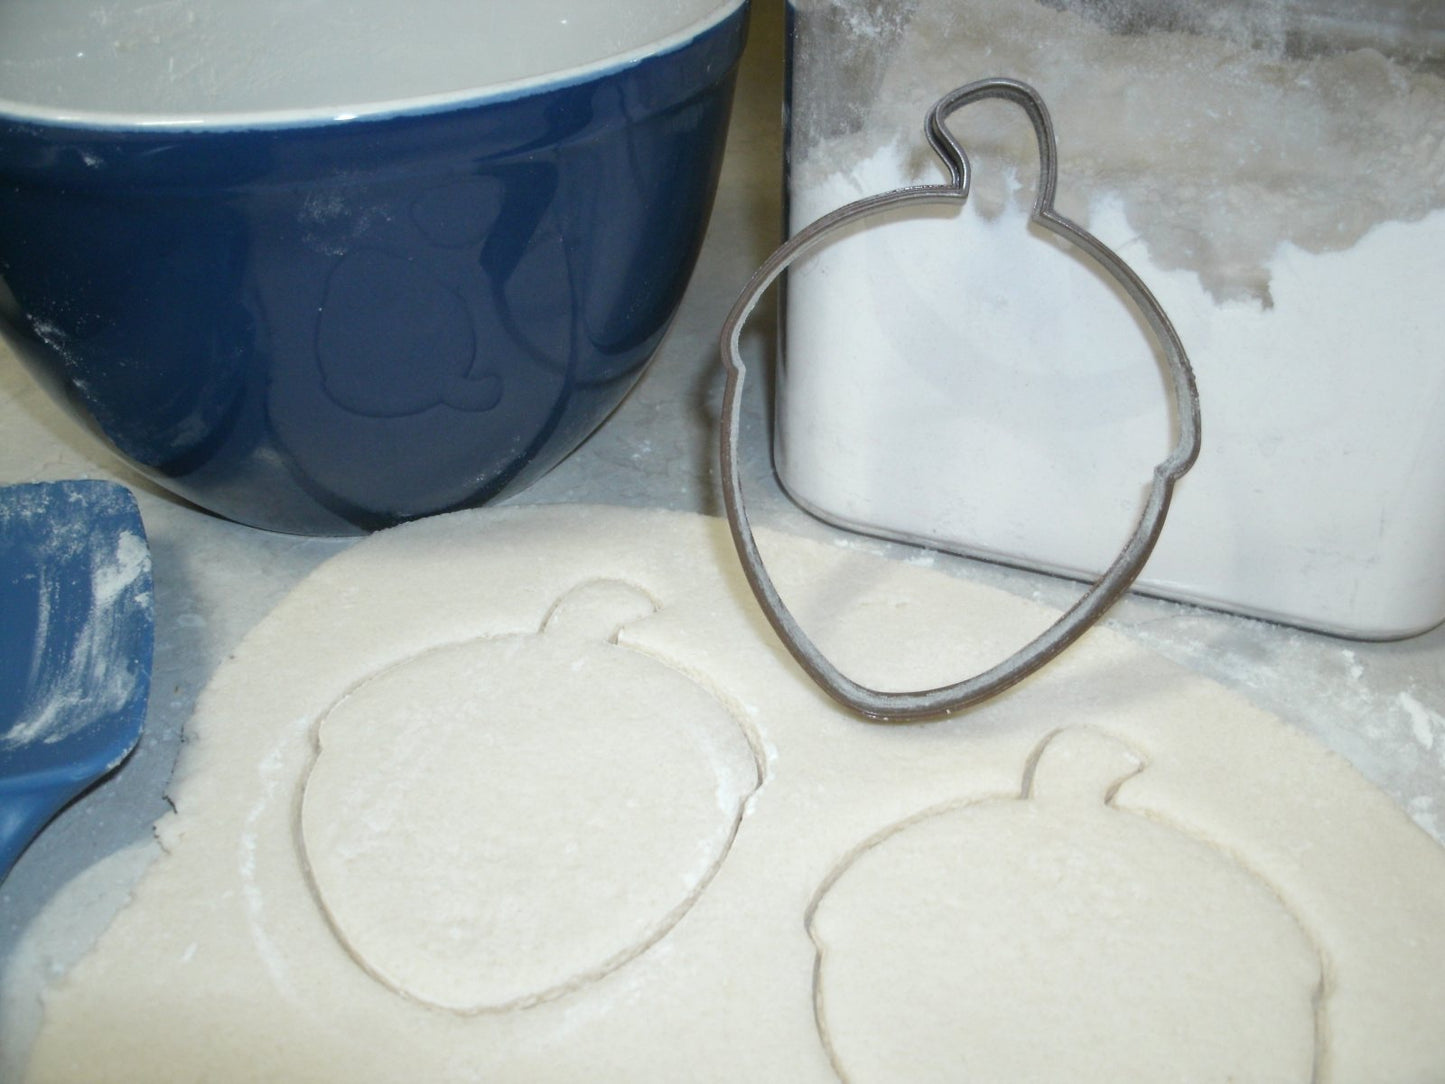 Acorn Oak Nut Seed Special Occasion Cookie Cutter Baking Tool Made in USA PR715